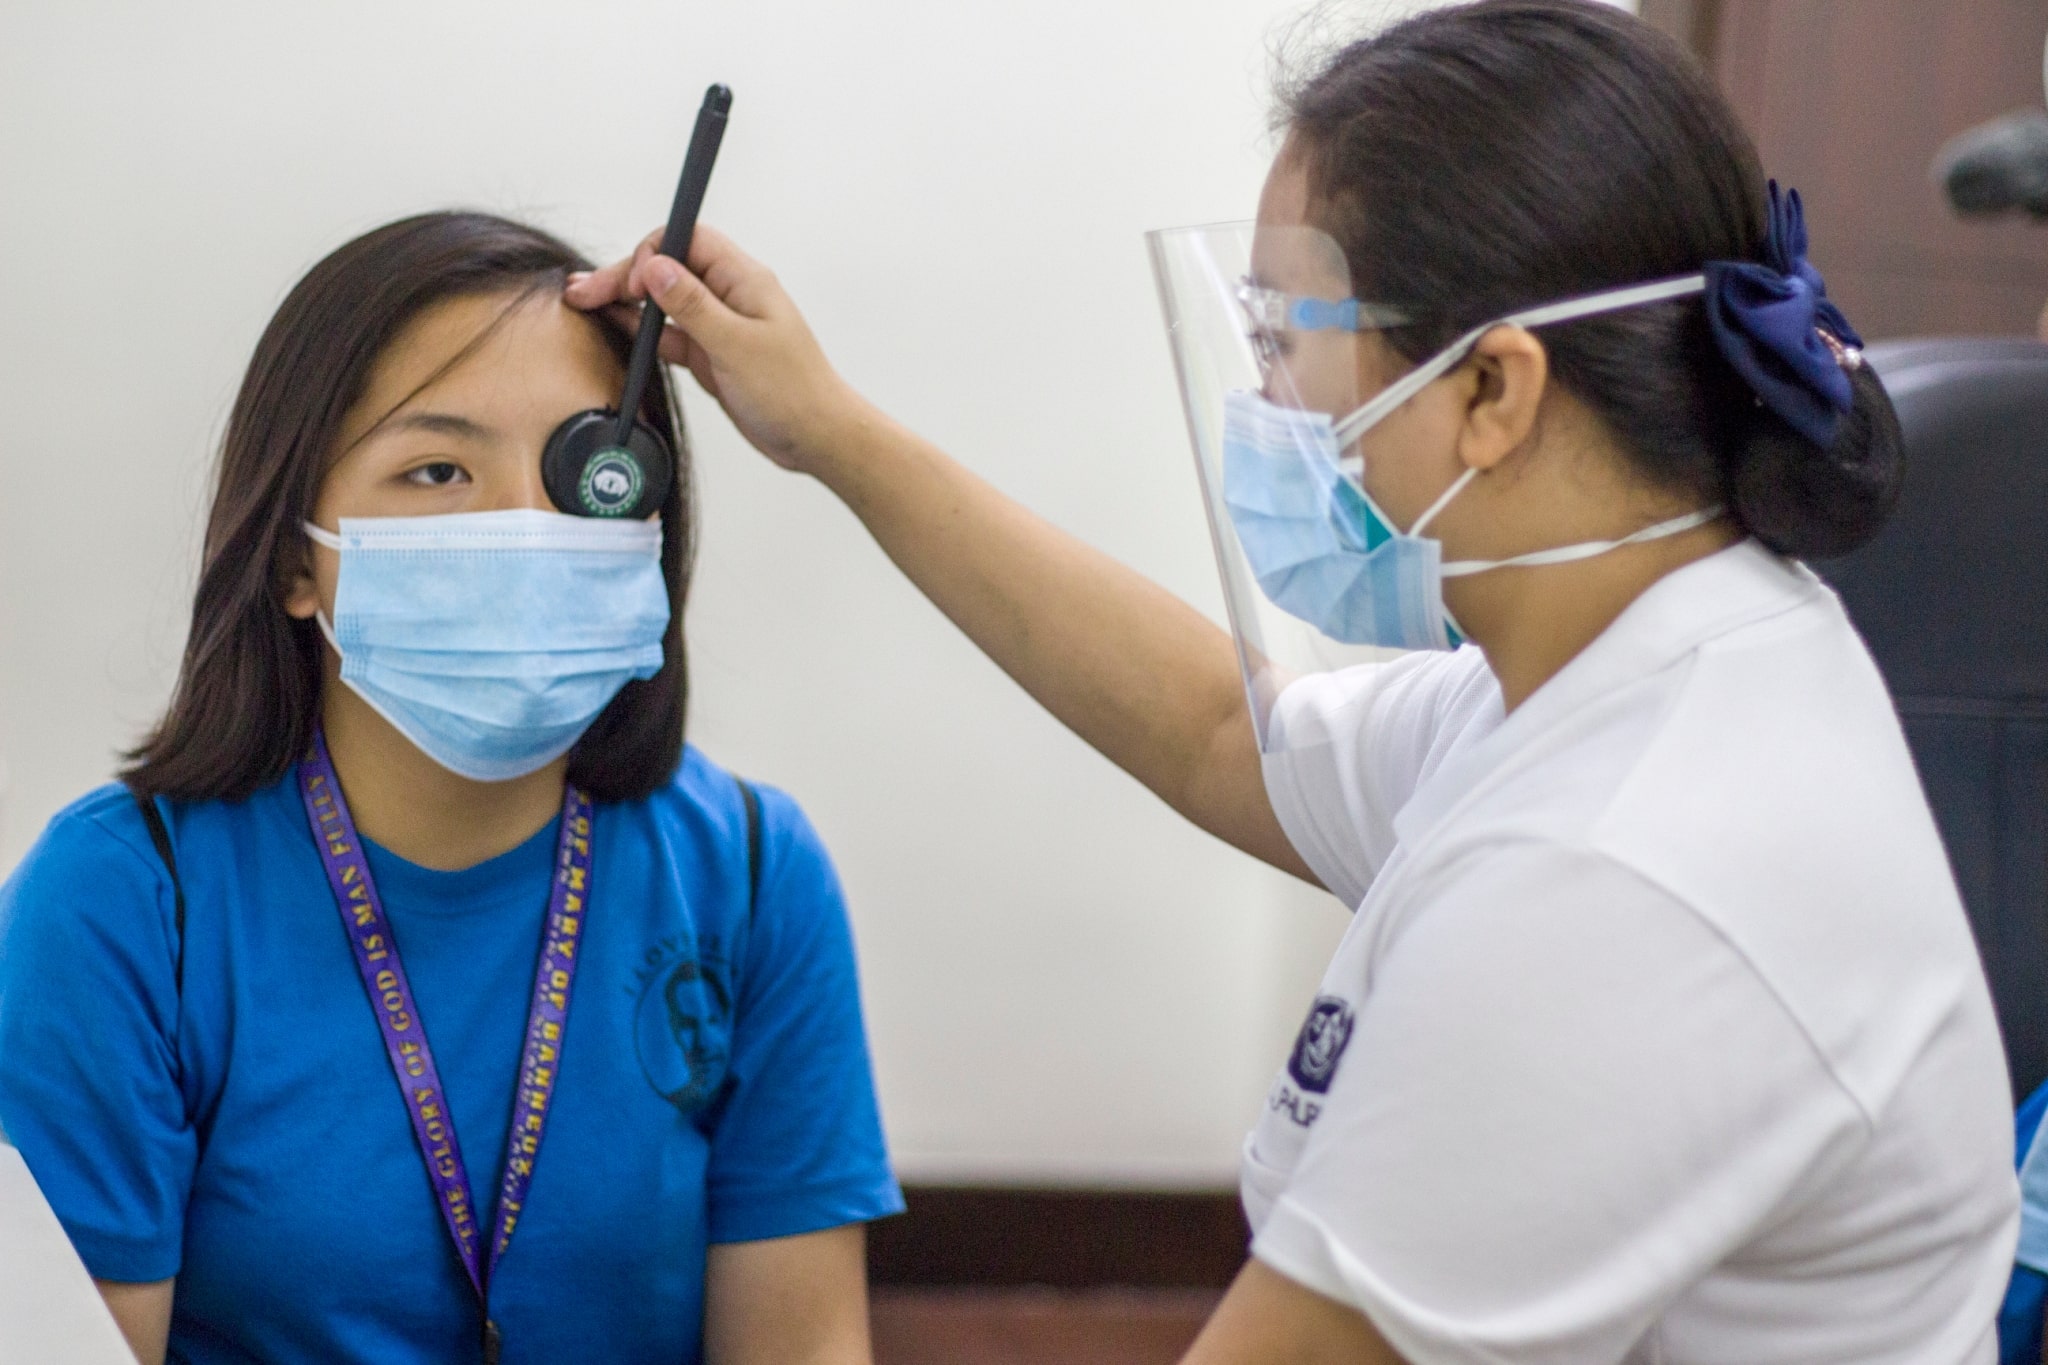 “I am proud to get free eye checkup because we don’t have to pay expensive fees outside,” says Efrailyn, Grade 10 scholar from the Girlstown.【Photo by Matt Serrano】